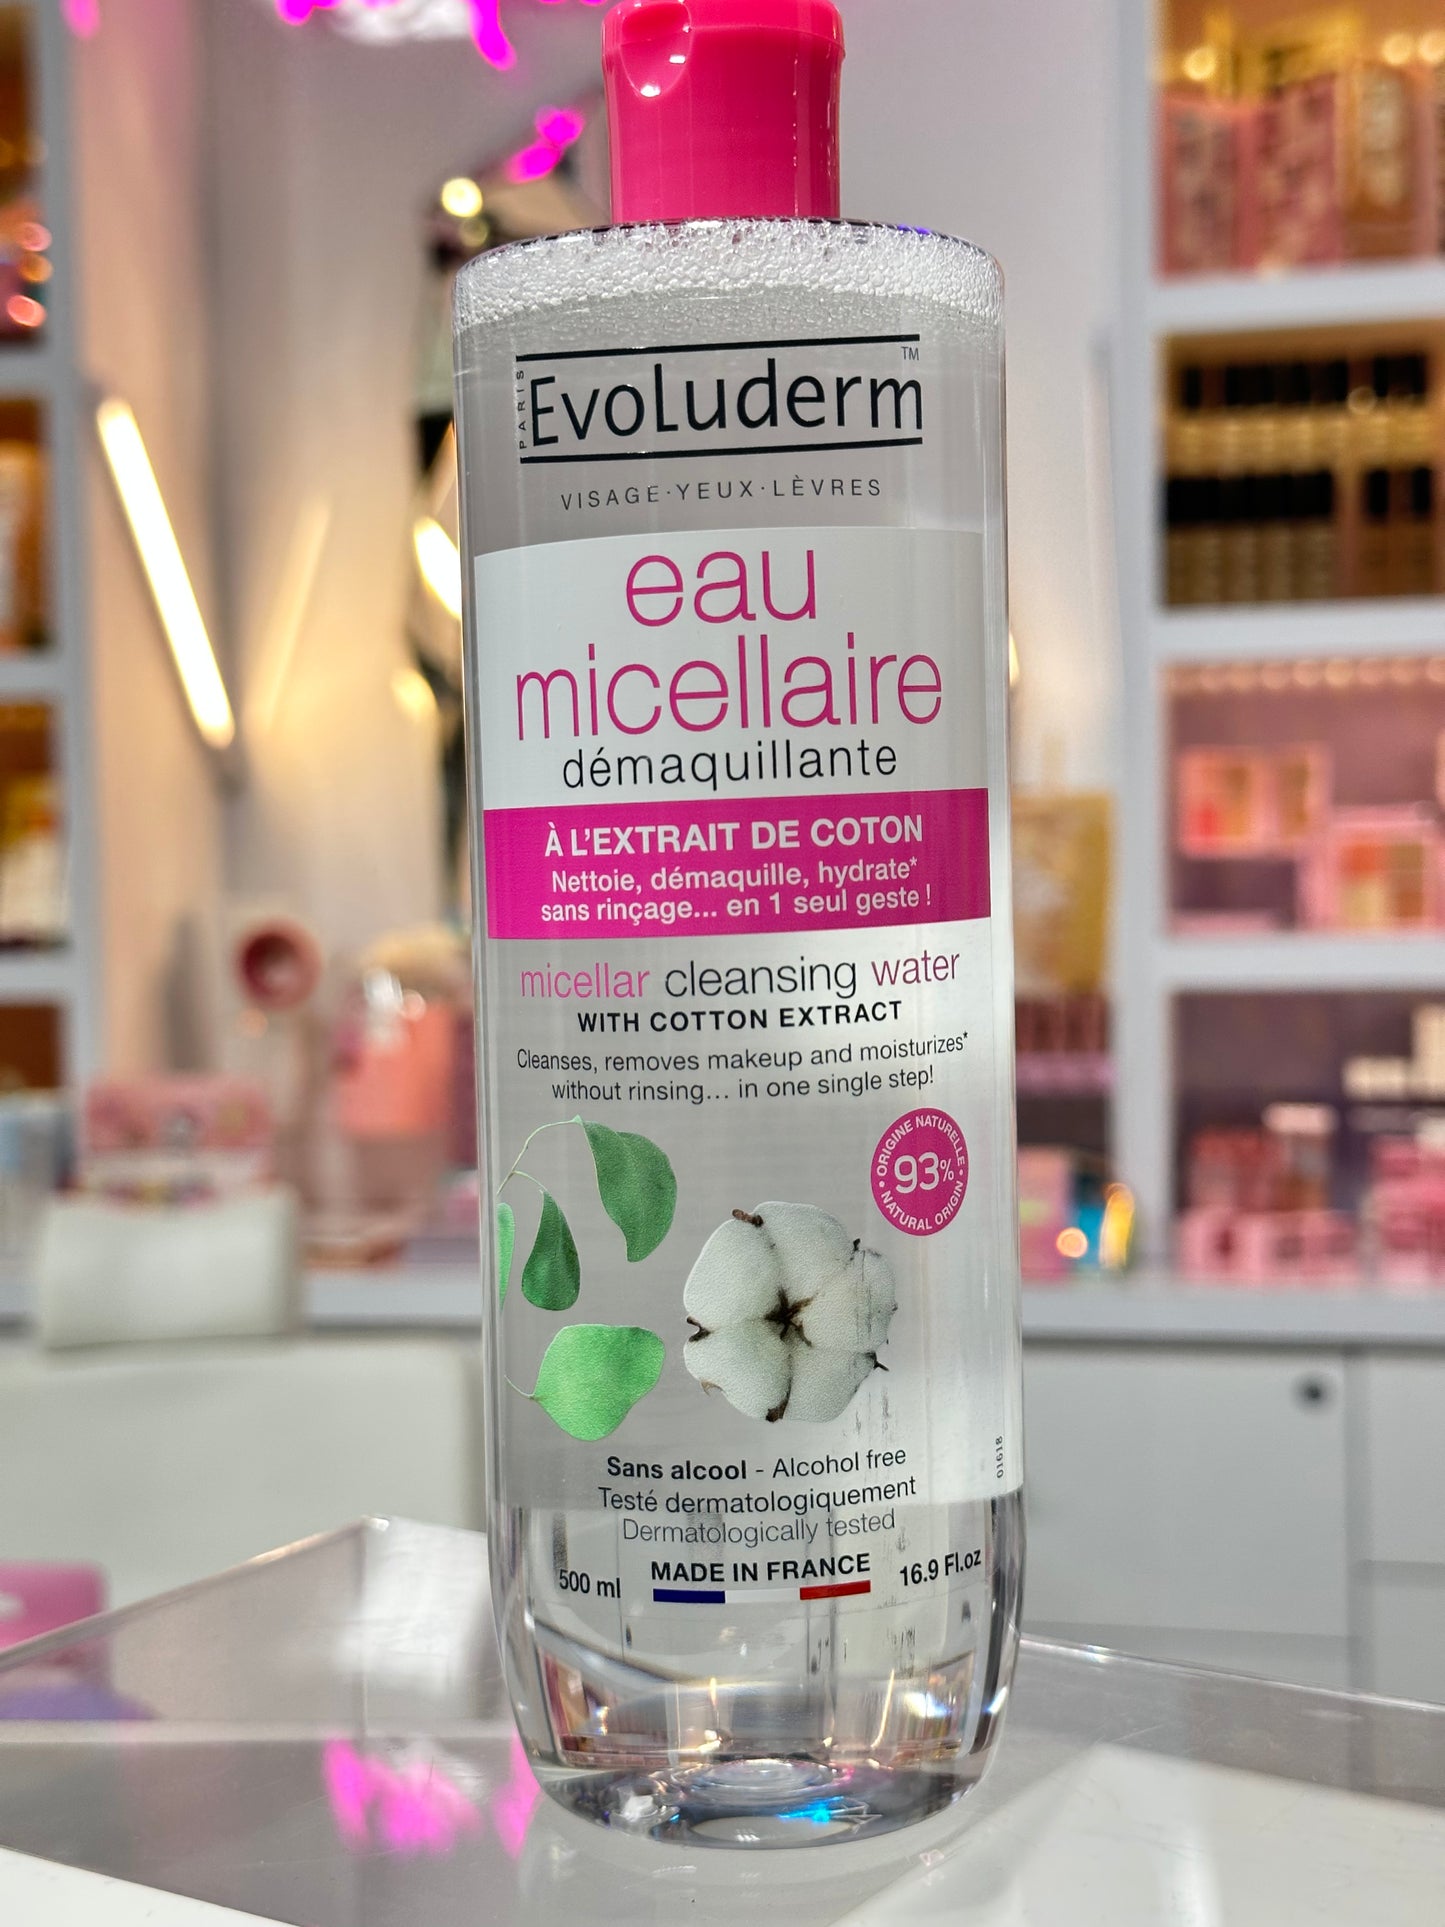 Evoluderm Micellar Cleansing Water with Cotton Extract